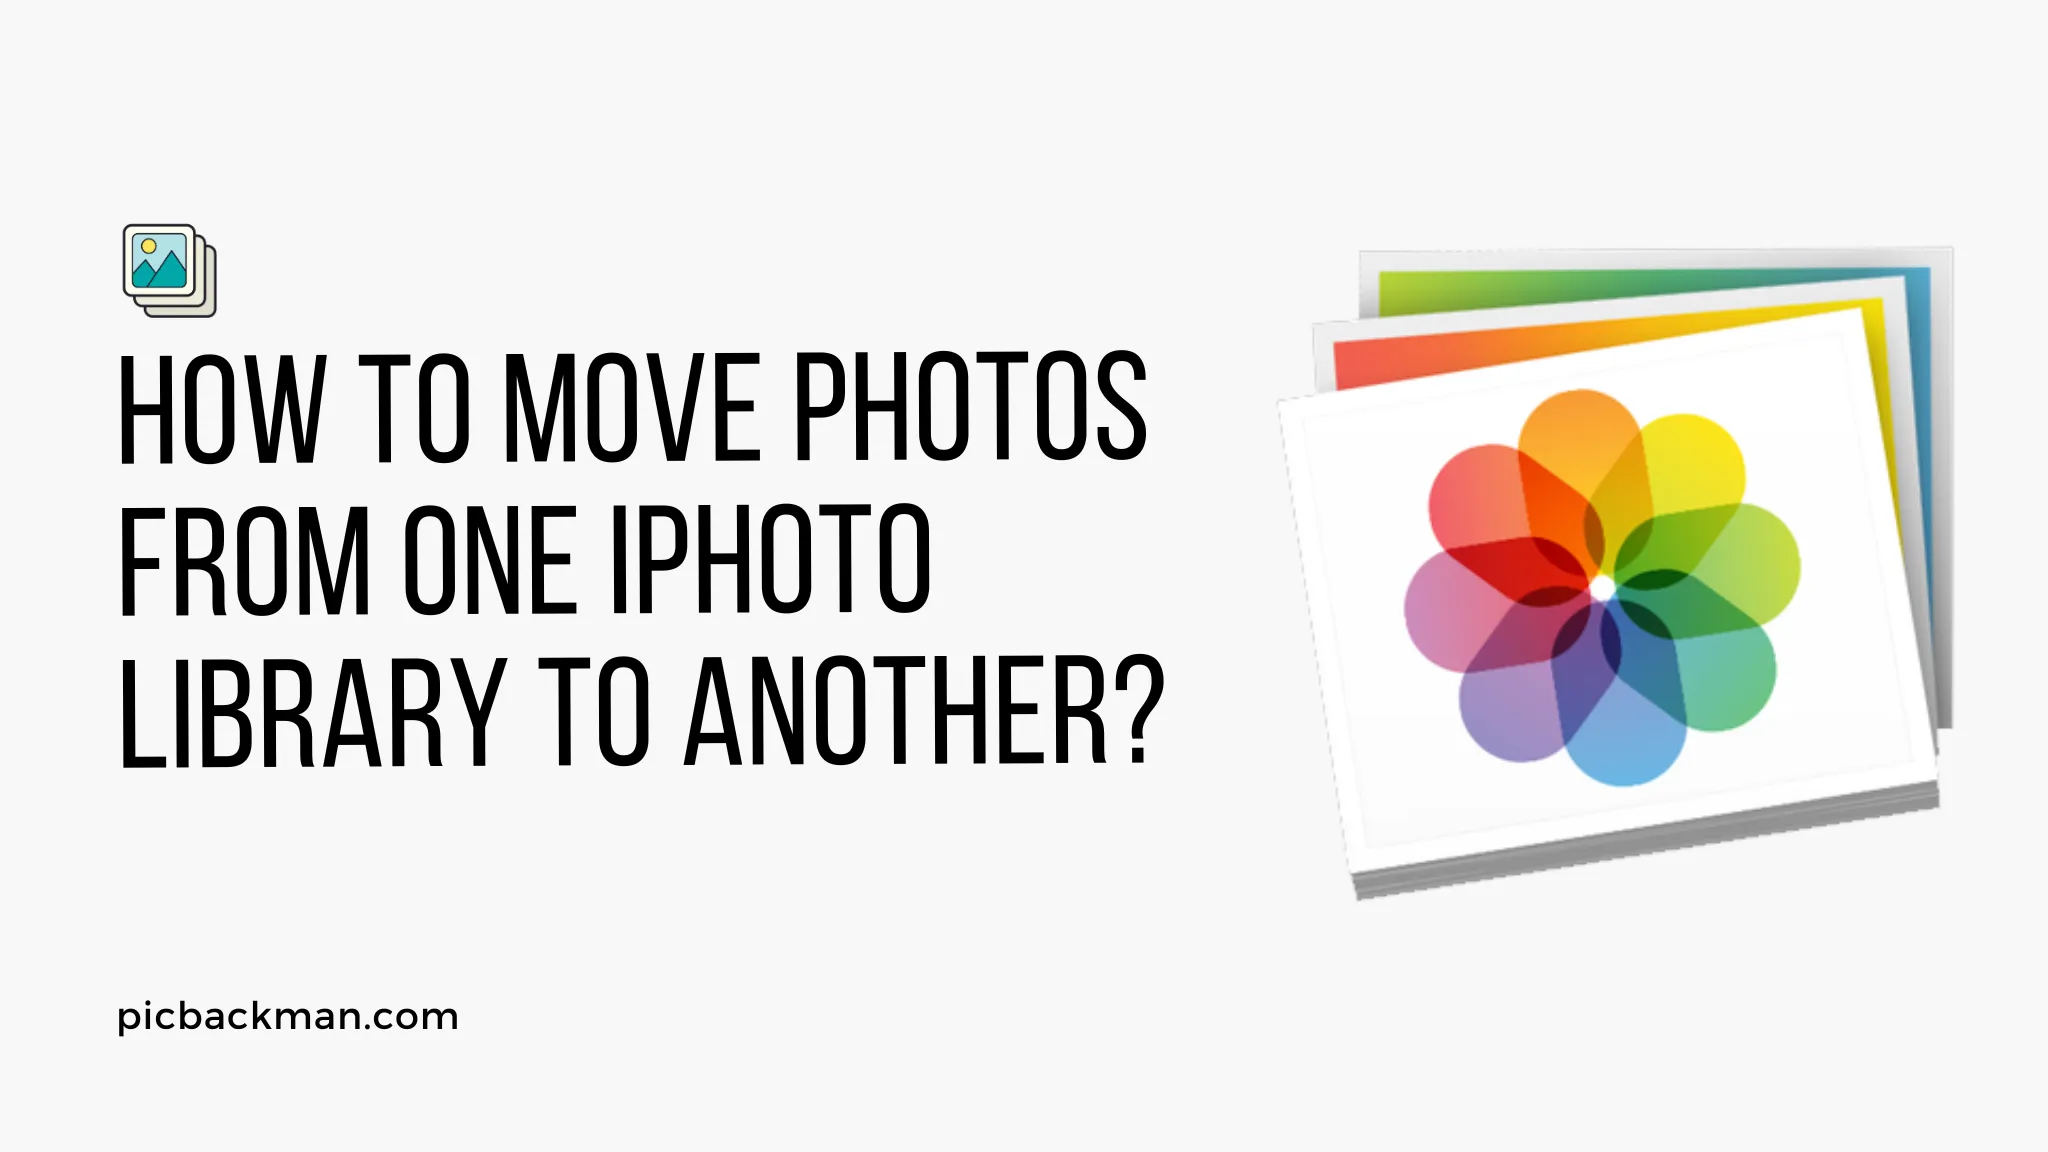 How to move photos from one iPhoto library to another?